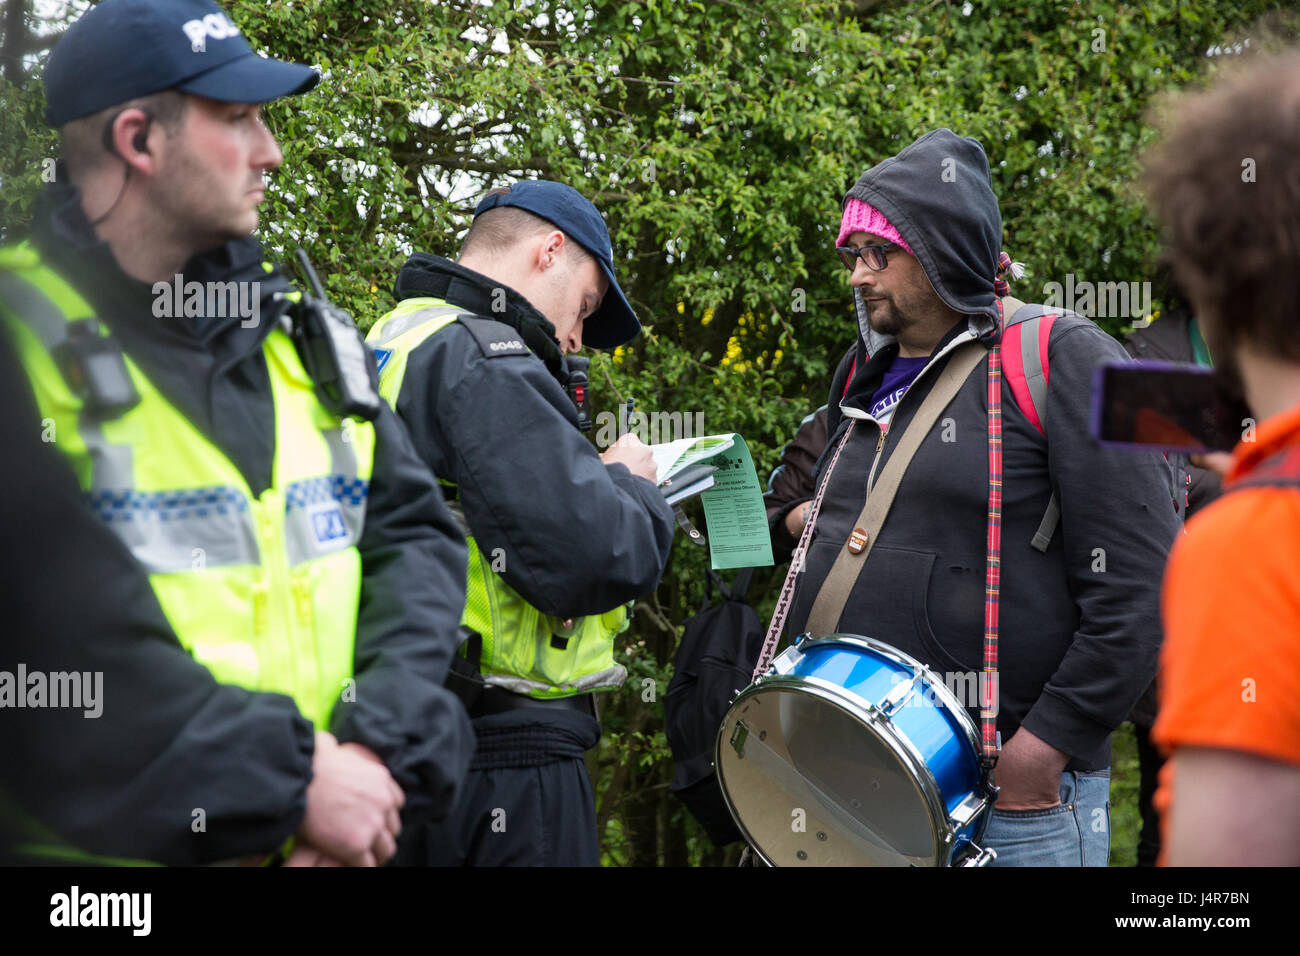 Milton Ernest, UK. 13th May, 2017. Police take down the details of a campaigner against immigration detention following a protest organised by Movement For Justice By Any Means Necessary outside Yarl's Wood Immigration Removal Centre. Campaigners, including former detainees, called for all immigration detention centres to be closed. Credit: Mark Kerrison/Alamy Live News Stock Photo